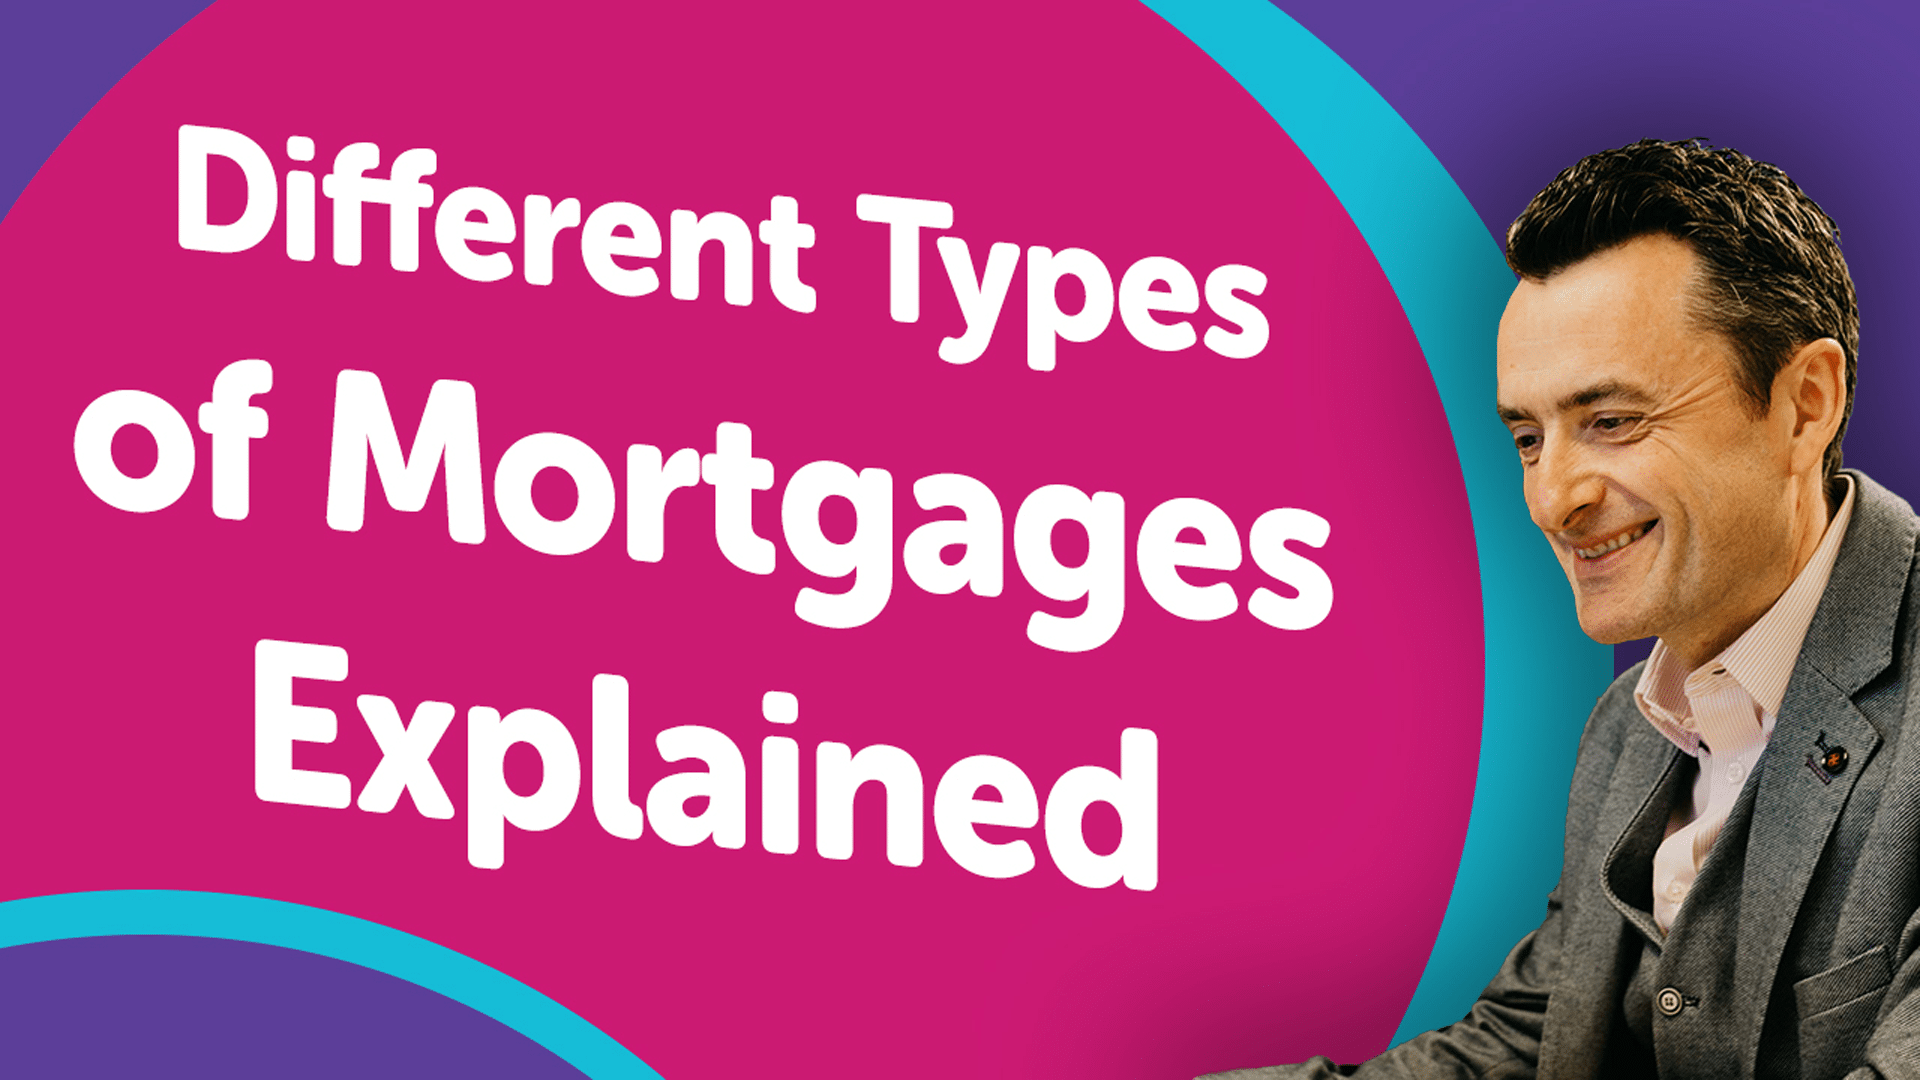 Explaining the Different Types of Mortgage in Newcastle